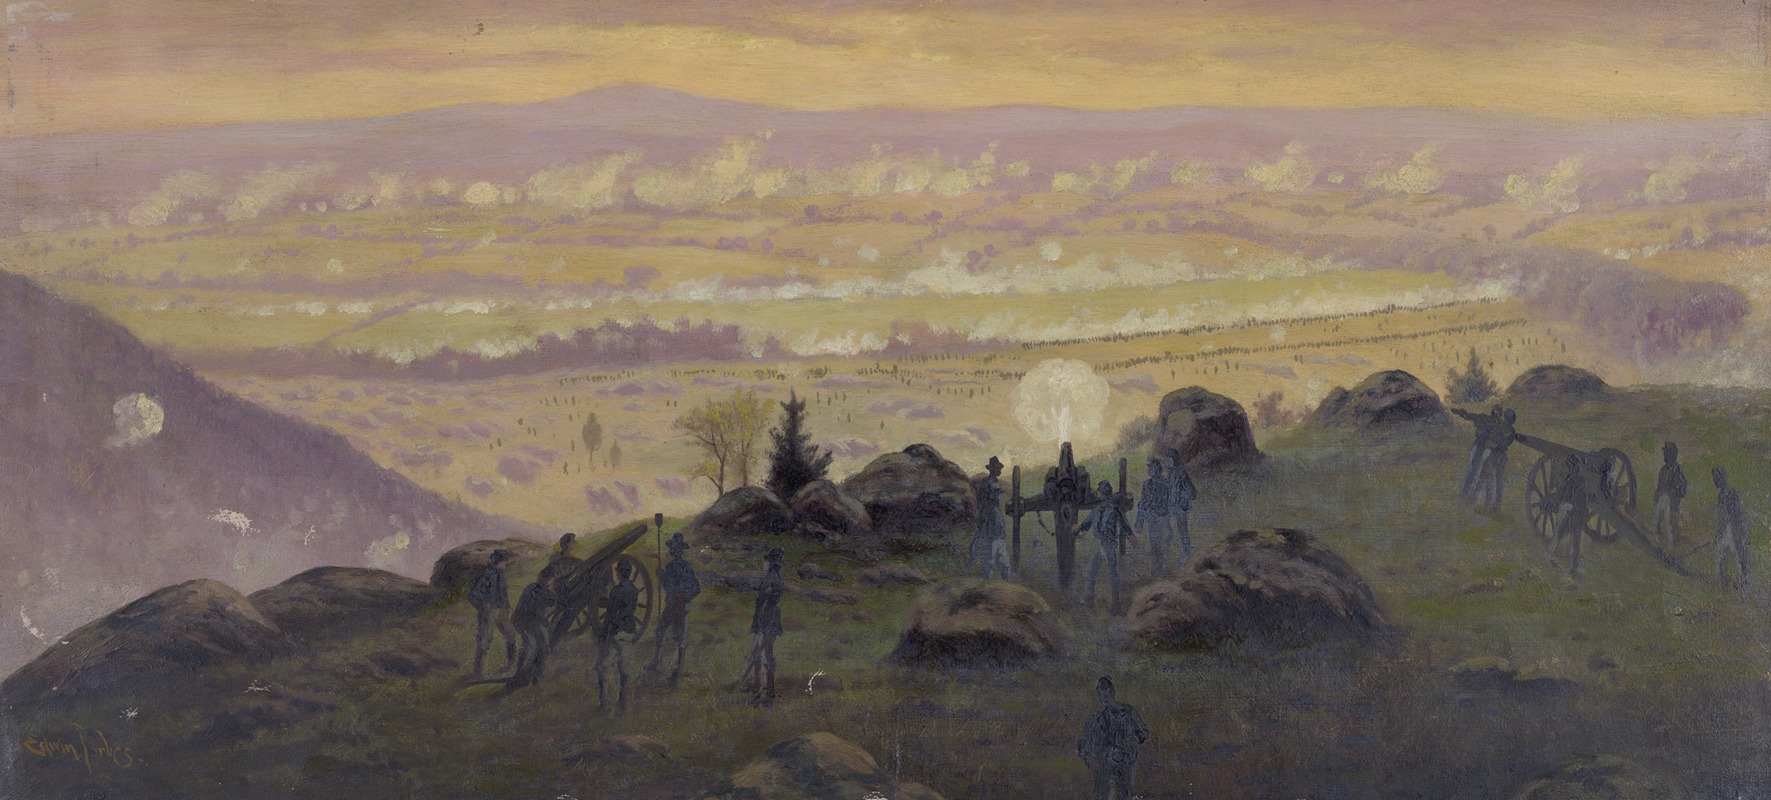 Edwin Forbes - View from the summit of Little Round Top at 7;30 P.M. July 3rd, 1863